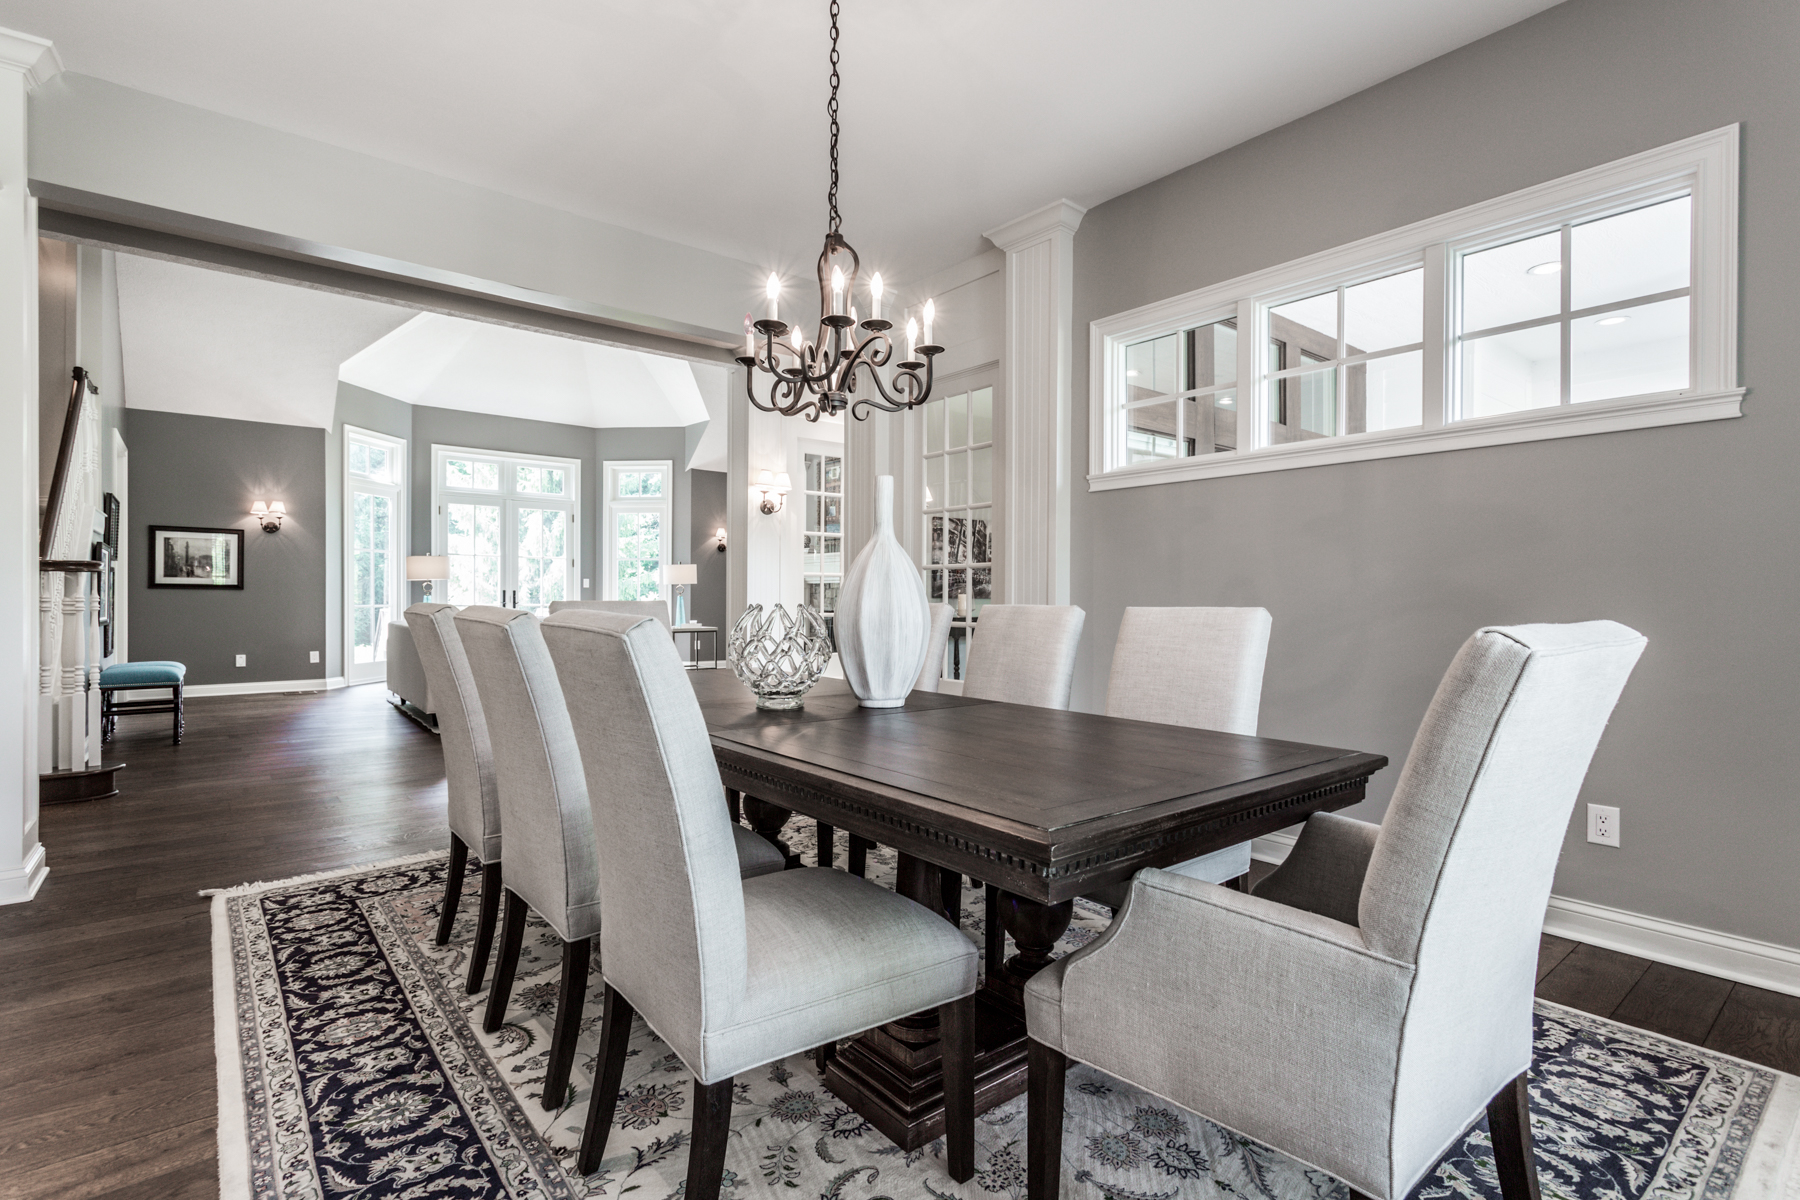 Real Estate Remarks In Reference To Dining Room